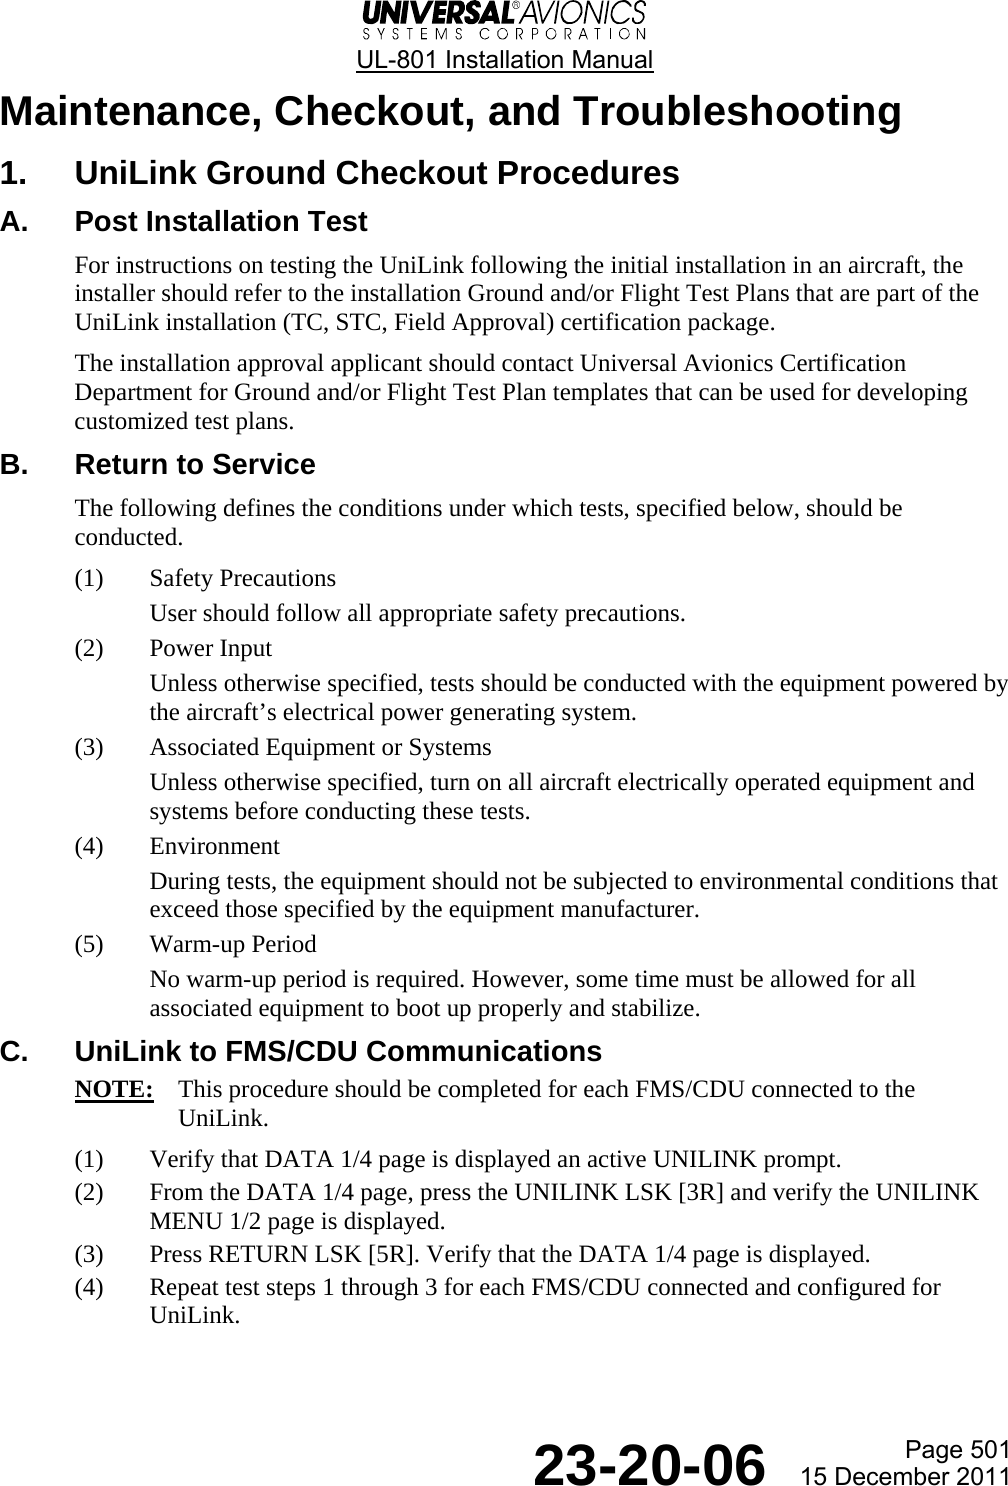  UL-801 Installation Manual  Page 501  23-20-06  15 December 2011 Maintenance, Checkout, and Troubleshooting 1.  UniLink Ground Checkout Procedures A.  Post Installation Test For instructions on testing the UniLink following the initial installation in an aircraft, the installer should refer to the installation Ground and/or Flight Test Plans that are part of the UniLink installation (TC, STC, Field Approval) certification package. The installation approval applicant should contact Universal Avionics Certification Department for Ground and/or Flight Test Plan templates that can be used for developing customized test plans. B.  Return to Service The following defines the conditions under which tests, specified below, should be conducted. (1) Safety Precautions User should follow all appropriate safety precautions. (2) Power Input Unless otherwise specified, tests should be conducted with the equipment powered by the aircraft’s electrical power generating system. (3) Associated Equipment or Systems Unless otherwise specified, turn on all aircraft electrically operated equipment and systems before conducting these tests. (4) Environment During tests, the equipment should not be subjected to environmental conditions that exceed those specified by the equipment manufacturer. (5) Warm-up Period No warm-up period is required. However, some time must be allowed for all associated equipment to boot up properly and stabilize. C.  UniLink to FMS/CDU Communications NOTE:  This procedure should be completed for each FMS/CDU connected to the UniLink. (1) Verify that DATA 1/4 page is displayed an active UNILINK prompt. (2) From the DATA 1/4 page, press the UNILINK LSK [3R] and verify the UNILINK MENU 1/2 page is displayed. (3) Press RETURN LSK [5R]. Verify that the DATA 1/4 page is displayed. (4) Repeat test steps 1 through 3 for each FMS/CDU connected and configured for UniLink. 